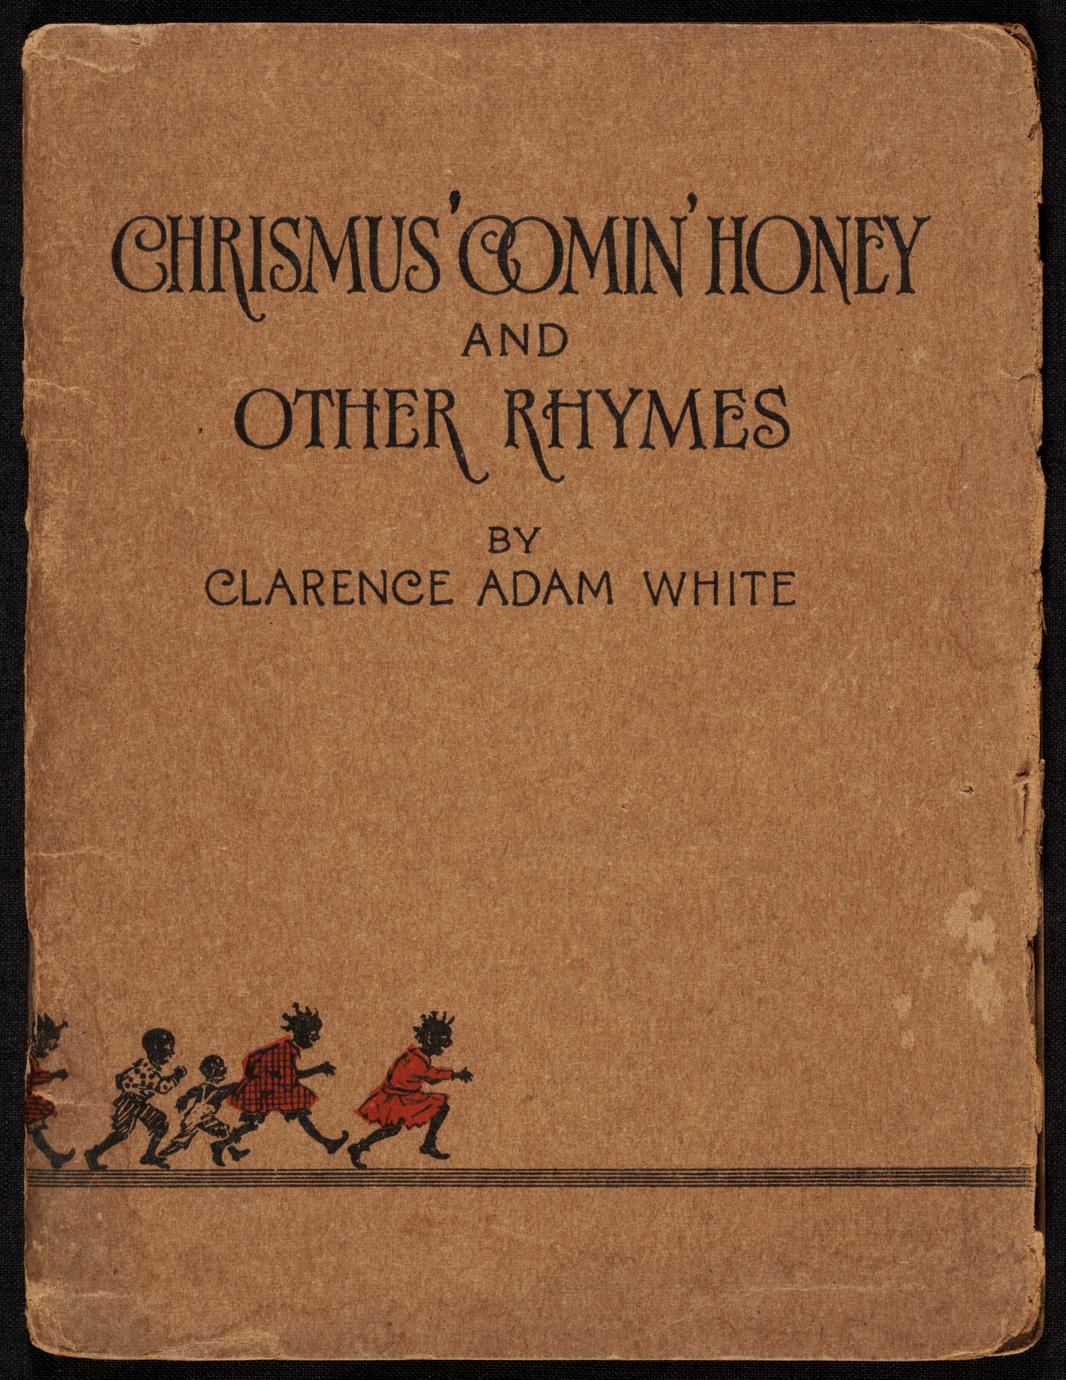 Crismus' comin', honey and other rhymes